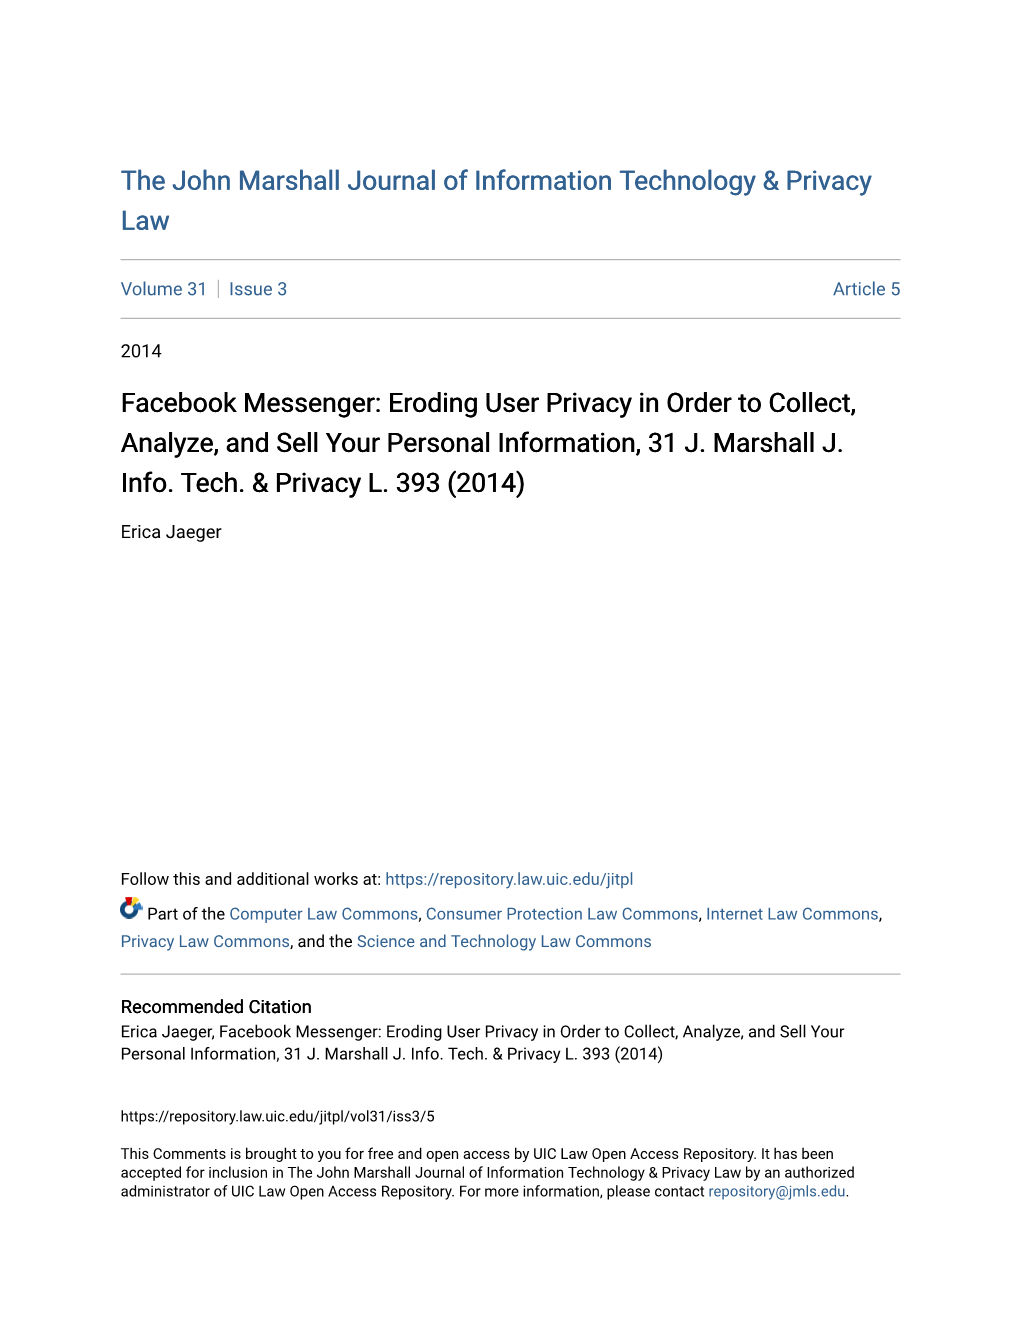 Facebook Messenger: Eroding User Privacy in Order to Collect, Analyze, and Sell Your Personal Information, 31 J